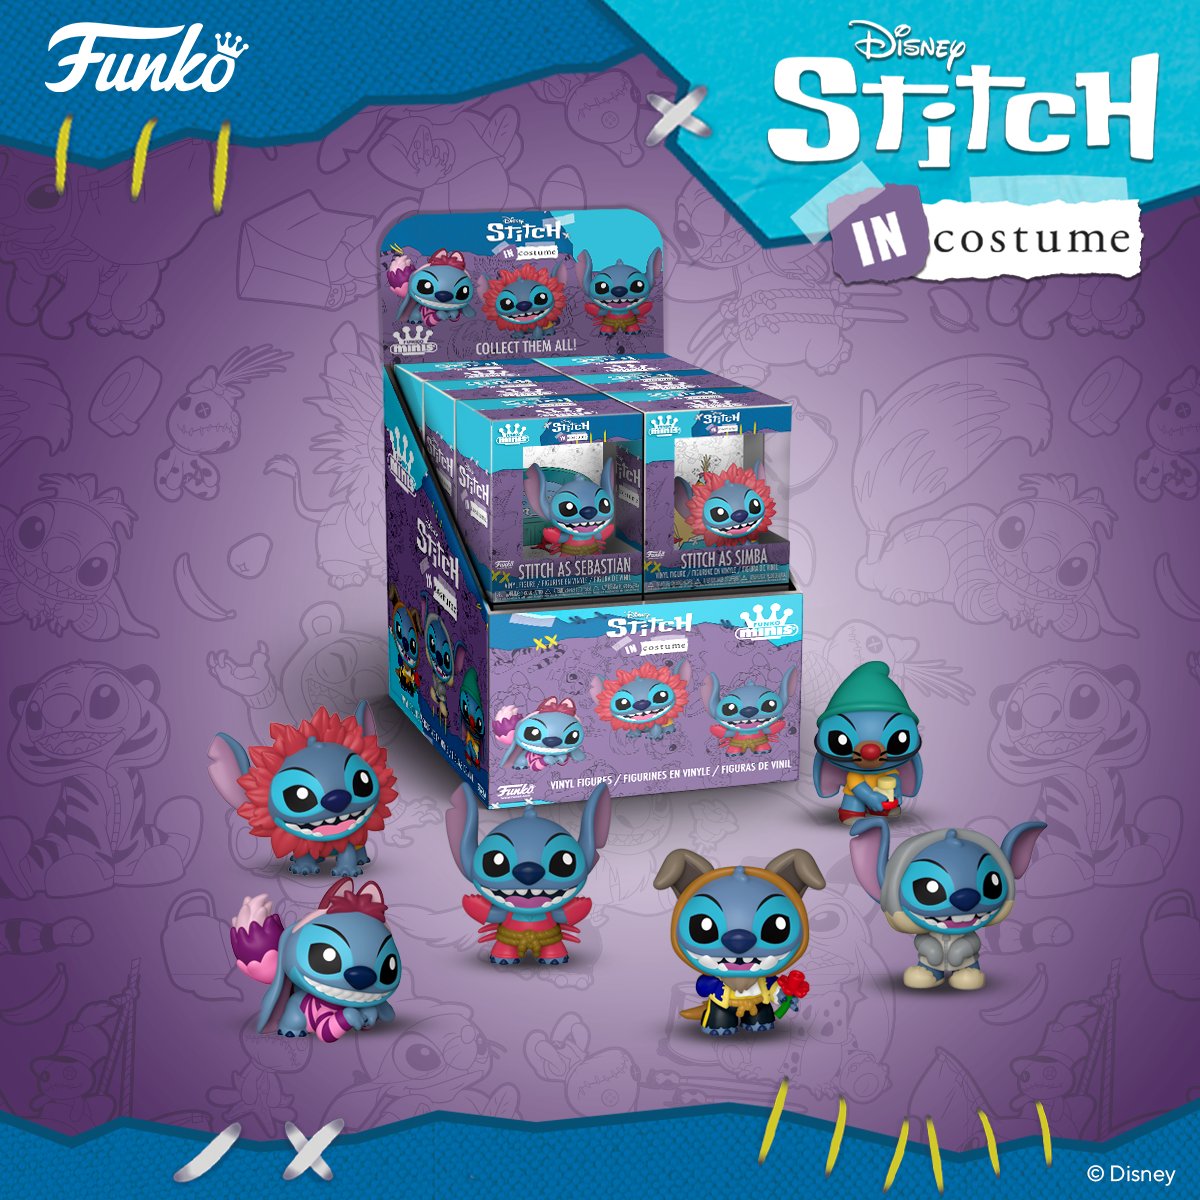 Experiment in Disguise: Pop! Disney’s Stitch in Costume is a character within a character! Catch him dressed as Disney’s Simba, Beast & more. The entire set includes exclusives, mystery minis & Plushies™️. Which ones will you bring home? bit.ly/44YJlCX #FunkoPop #Funko